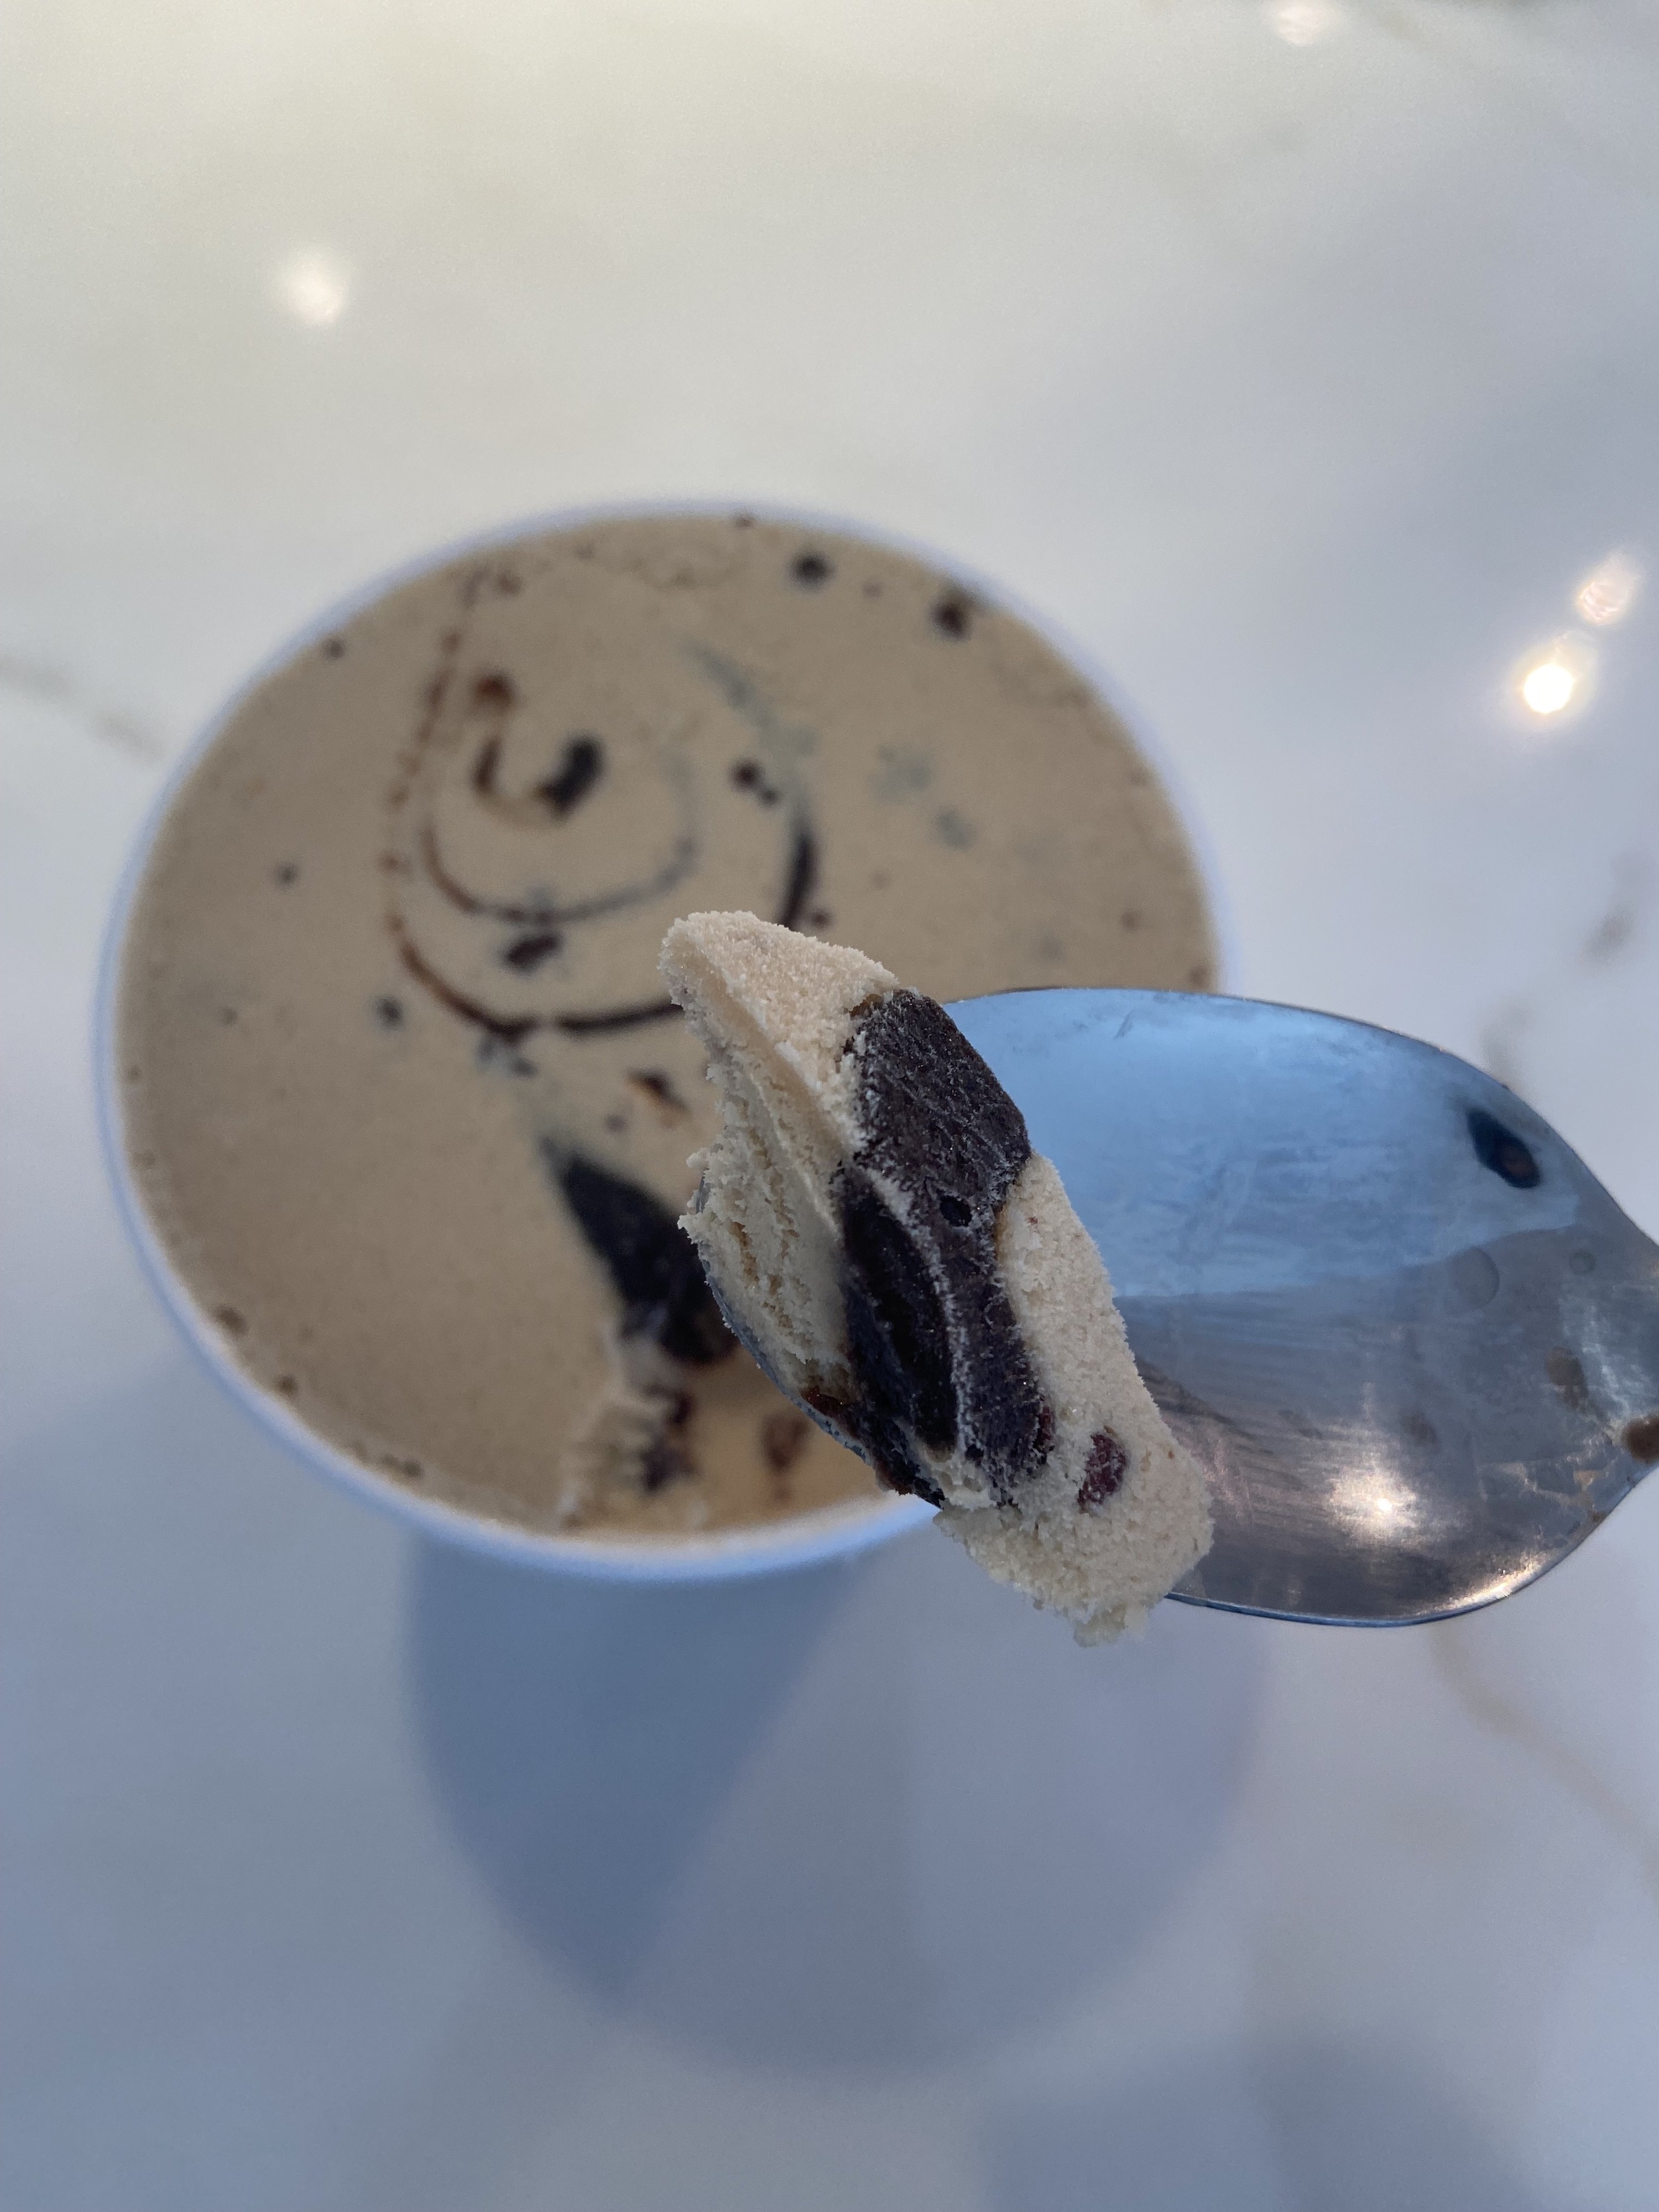 The swirl is more prominent in this ice cream, and a spoonful of it shows it having layers of chocolate and fudge